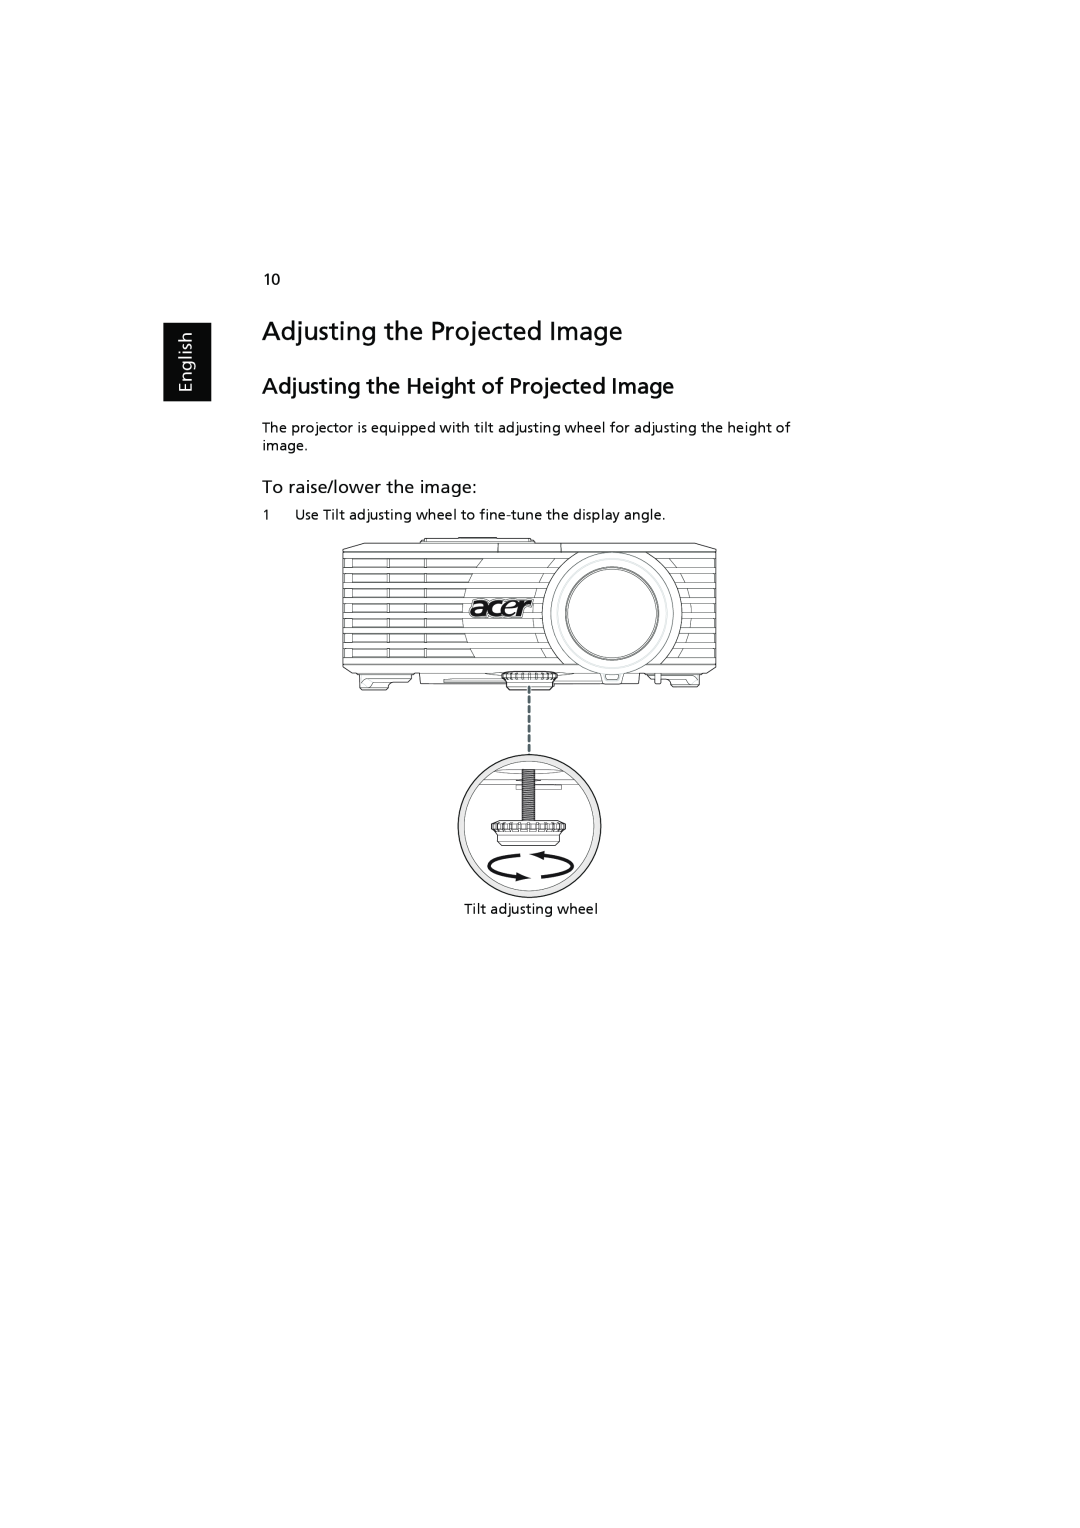 Acer K11 manual Adjusting the Projected Image, Adjusting the Height of Projected Image, To raise/lower the image, English 